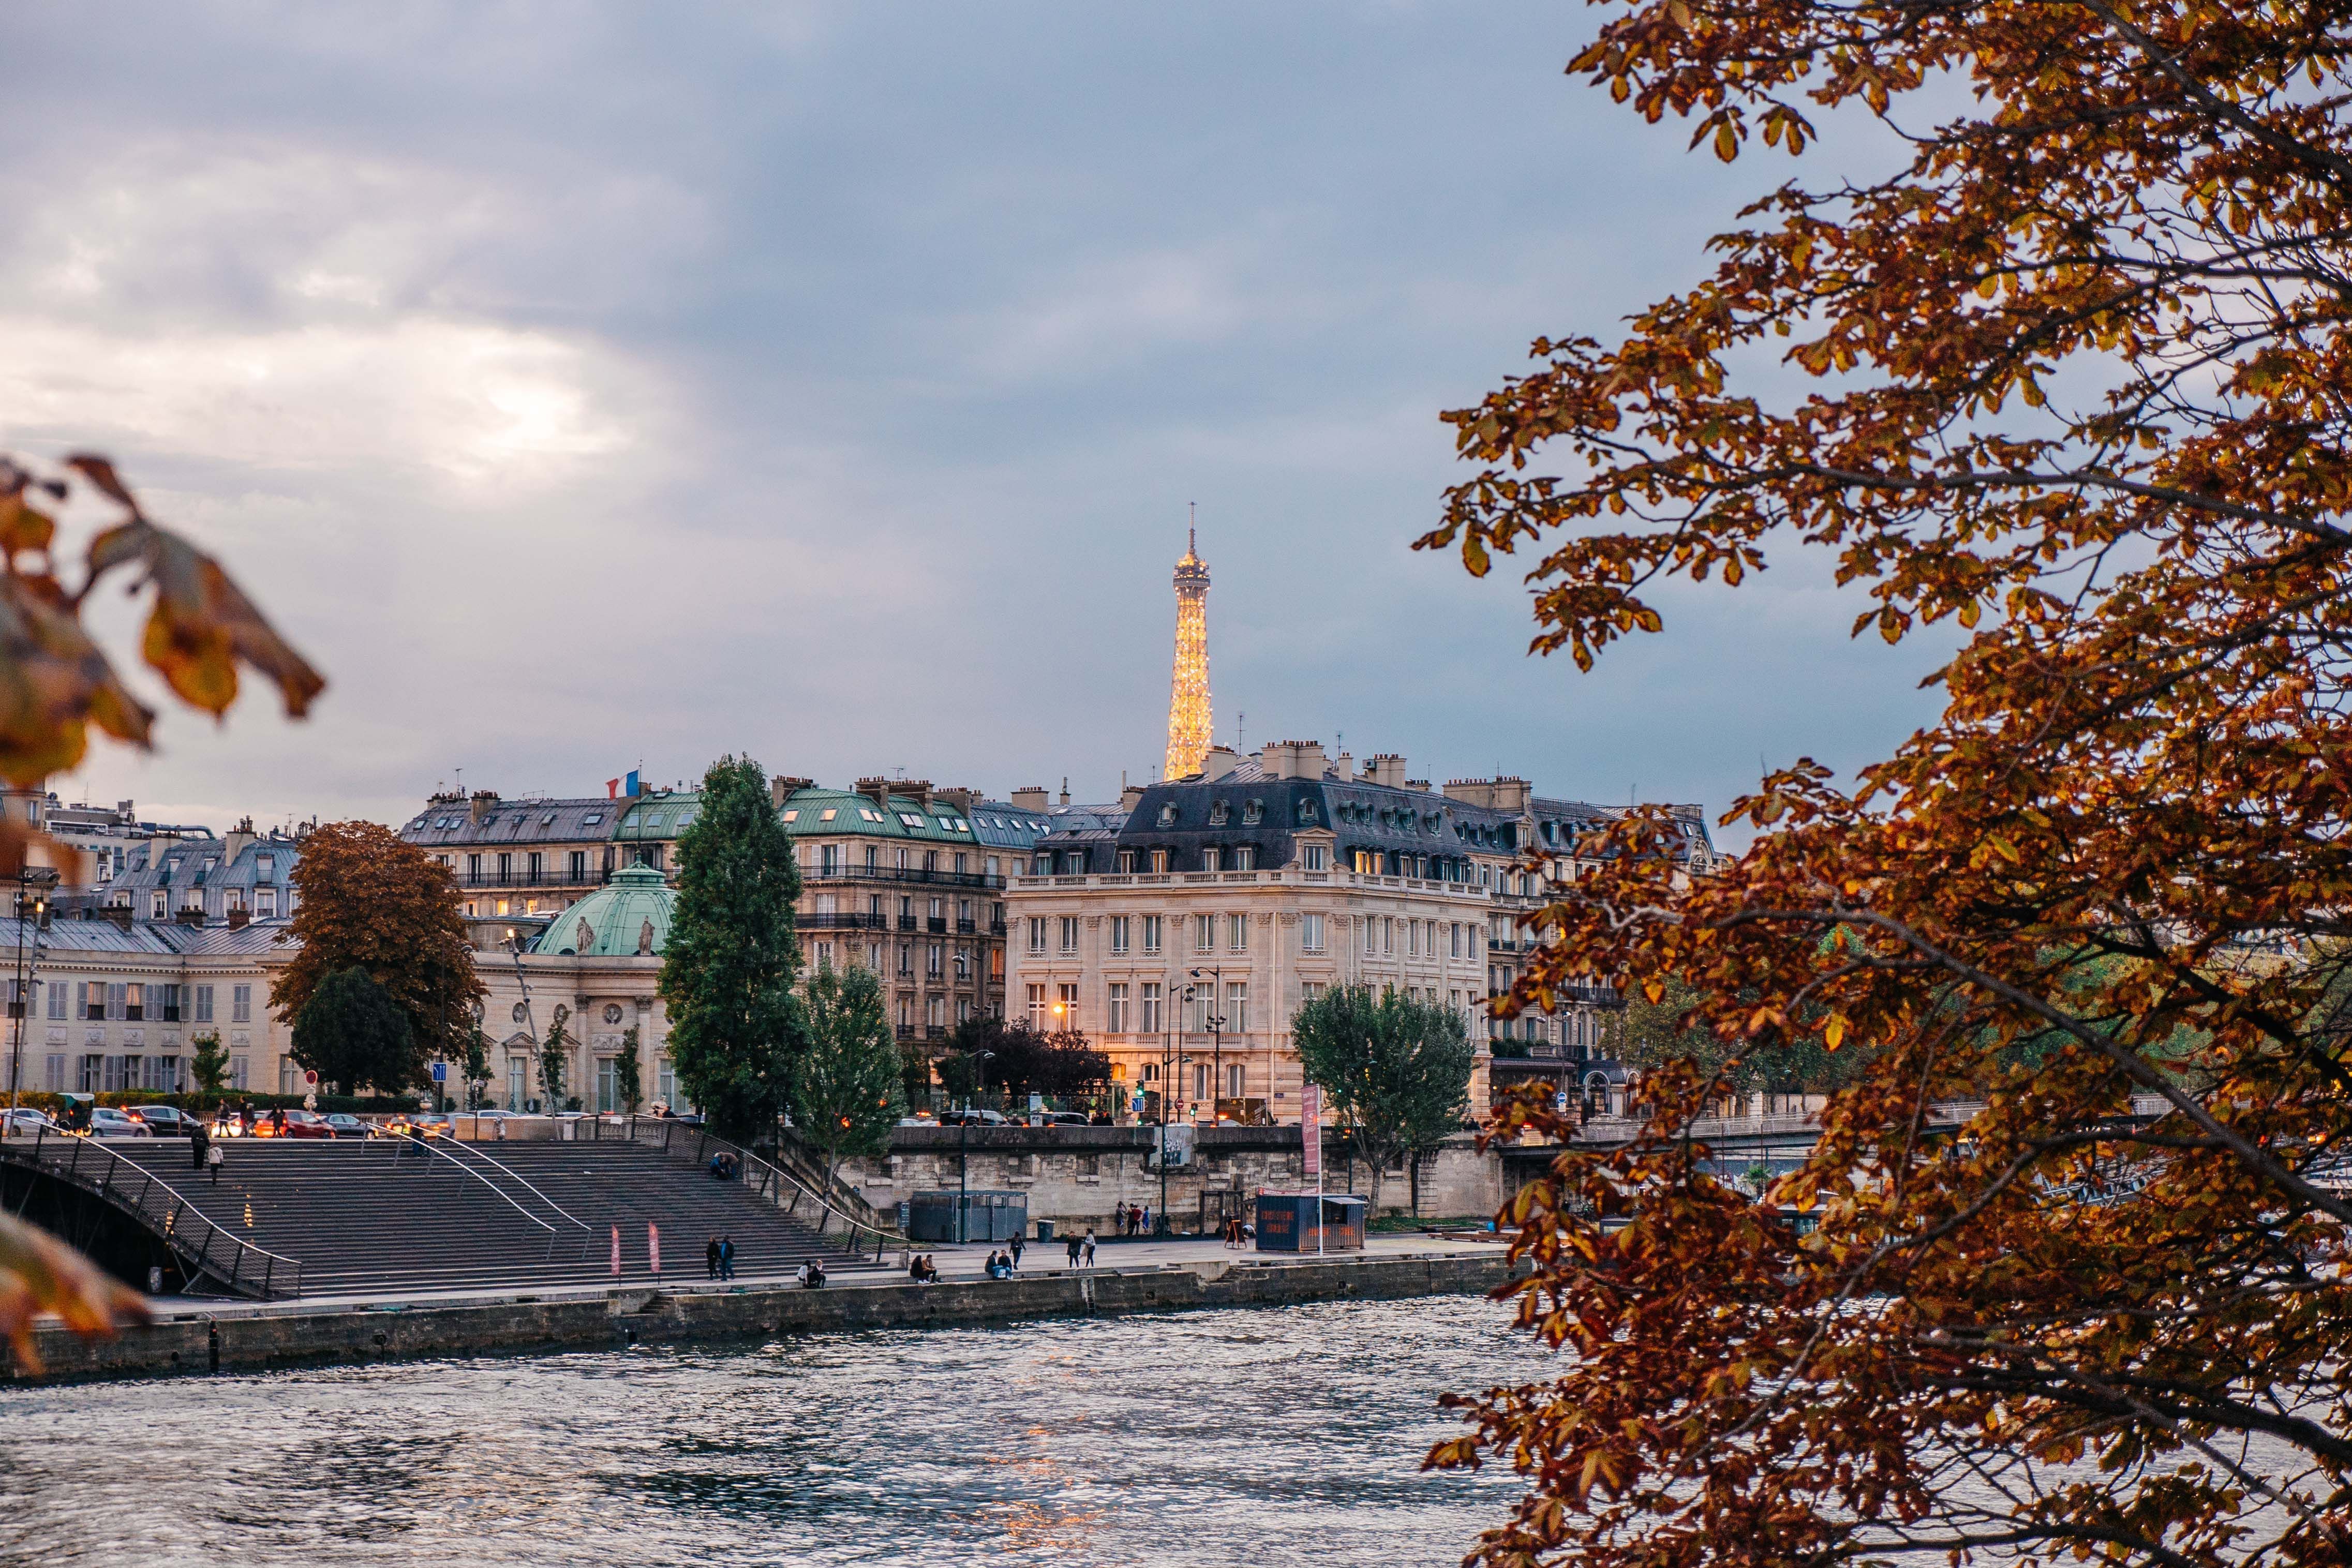 The Eiffel Tower and the Seine River in Paris, France, framed by a tree with orange leaves. - France